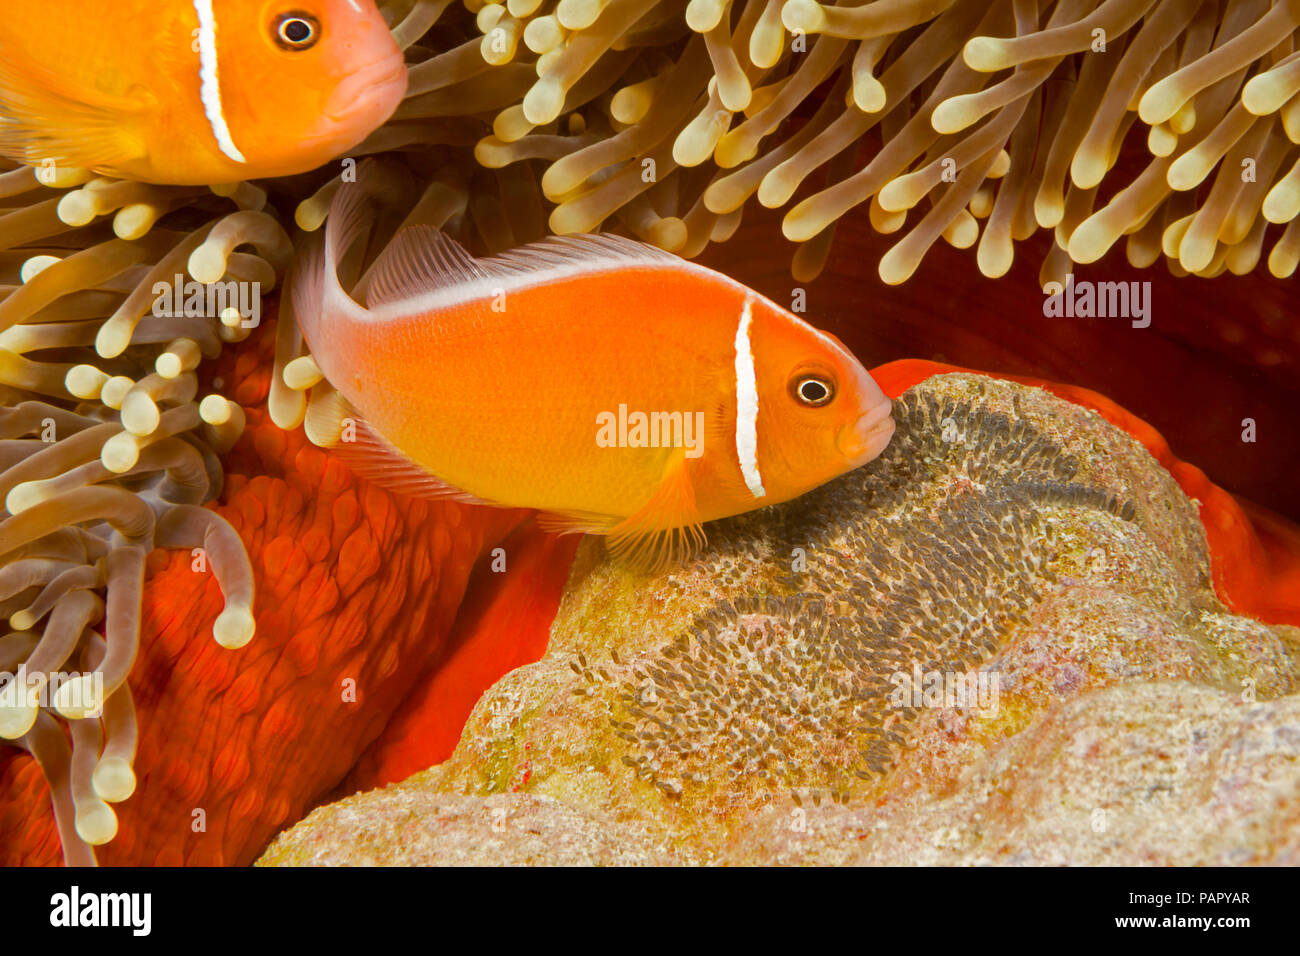 This common anemonefish, Amphiprion perideraion, is most often found associated with the anemone, Heteractis magnifica, as pictured here along with it Stock Photo